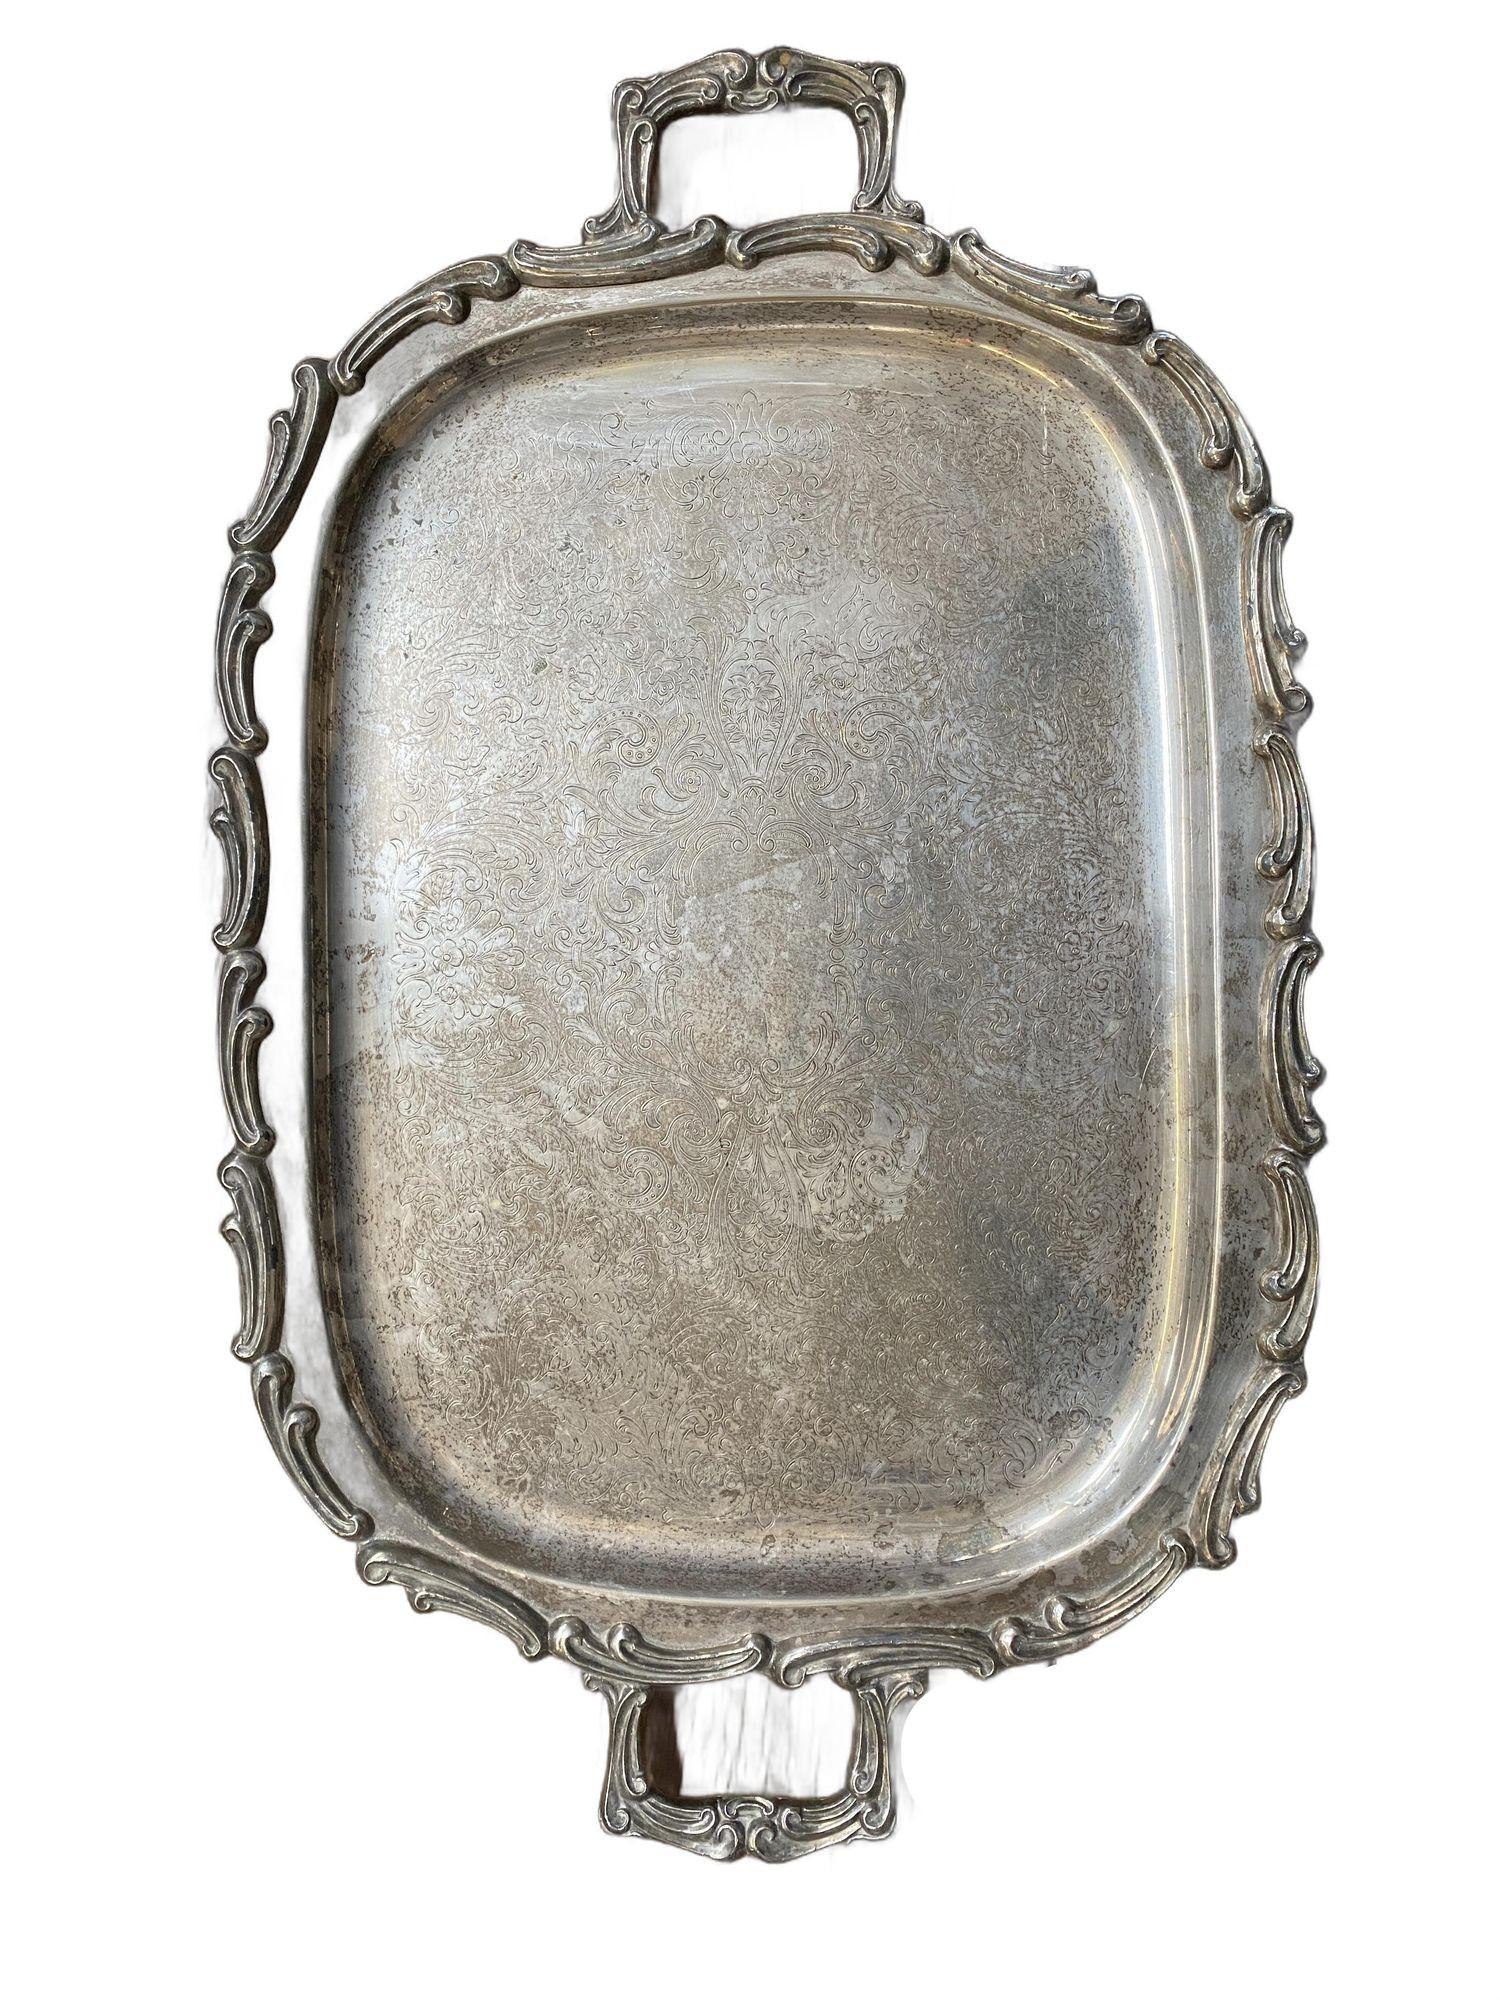 1900 Edwardian Silver-plate Serving Tray by Leonard In Excellent Condition For Sale In Van Nuys, CA